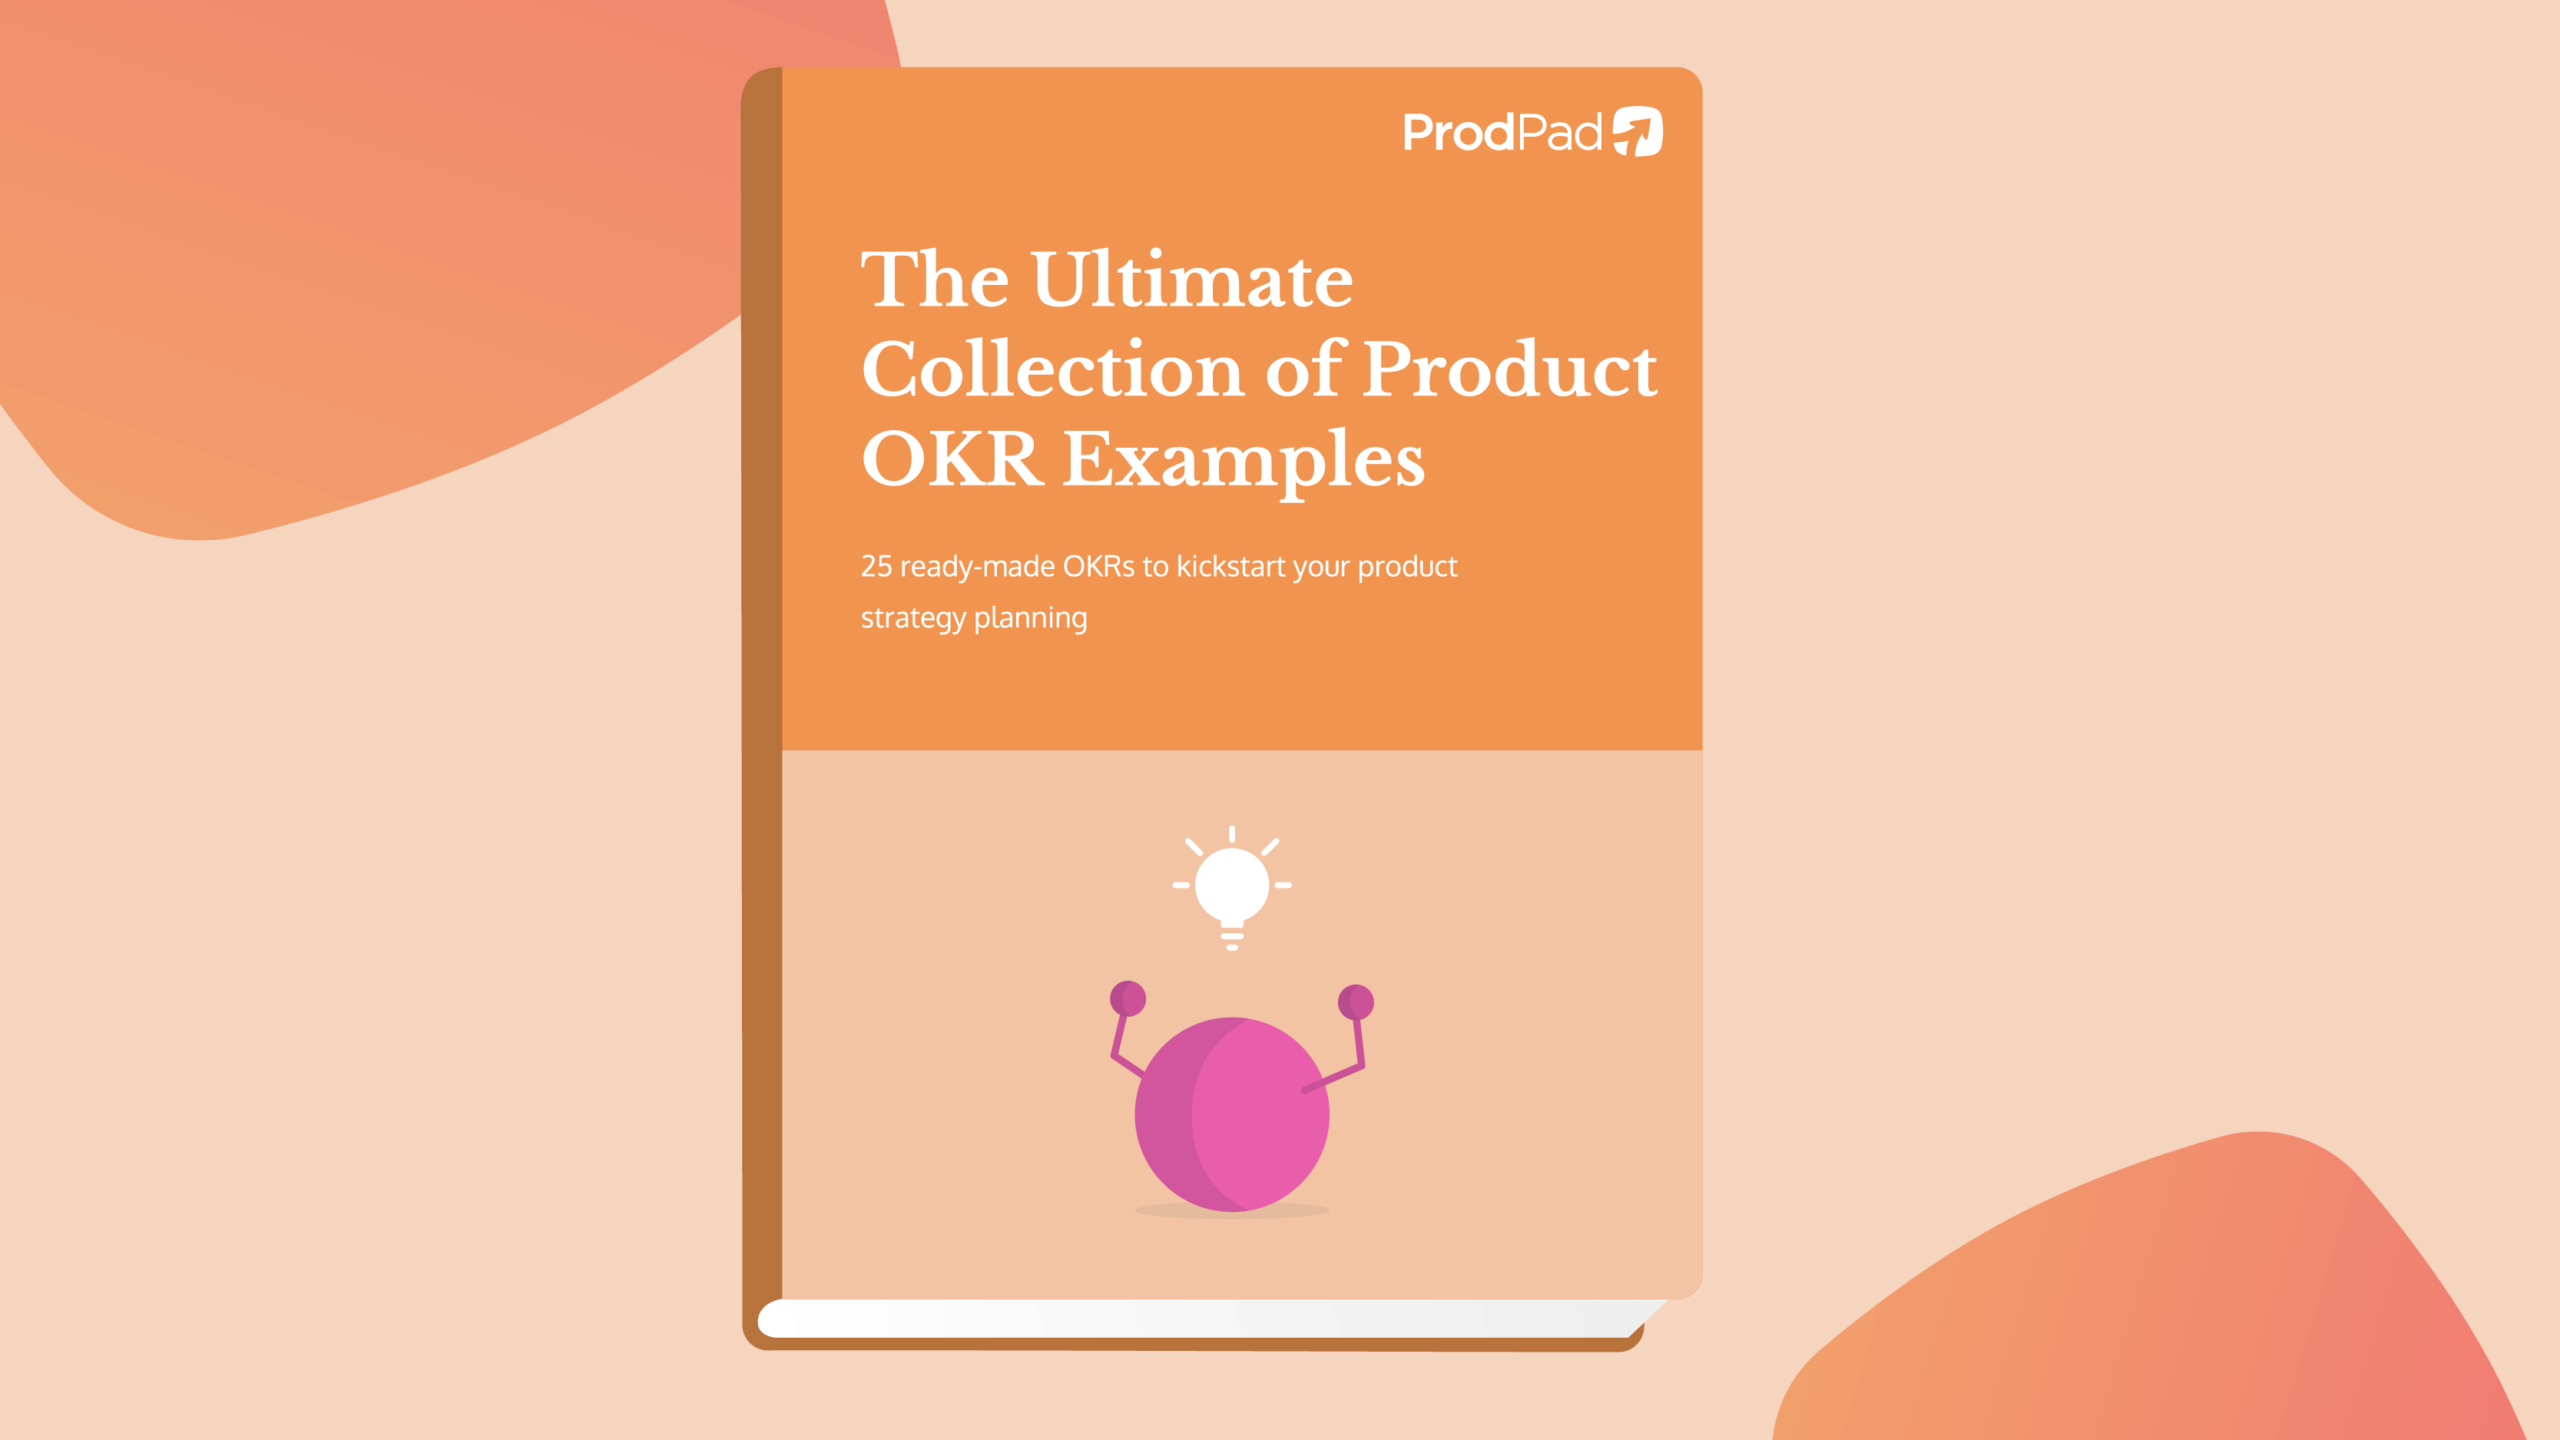 The Ultimate Collection of Product OKR Examples related article image